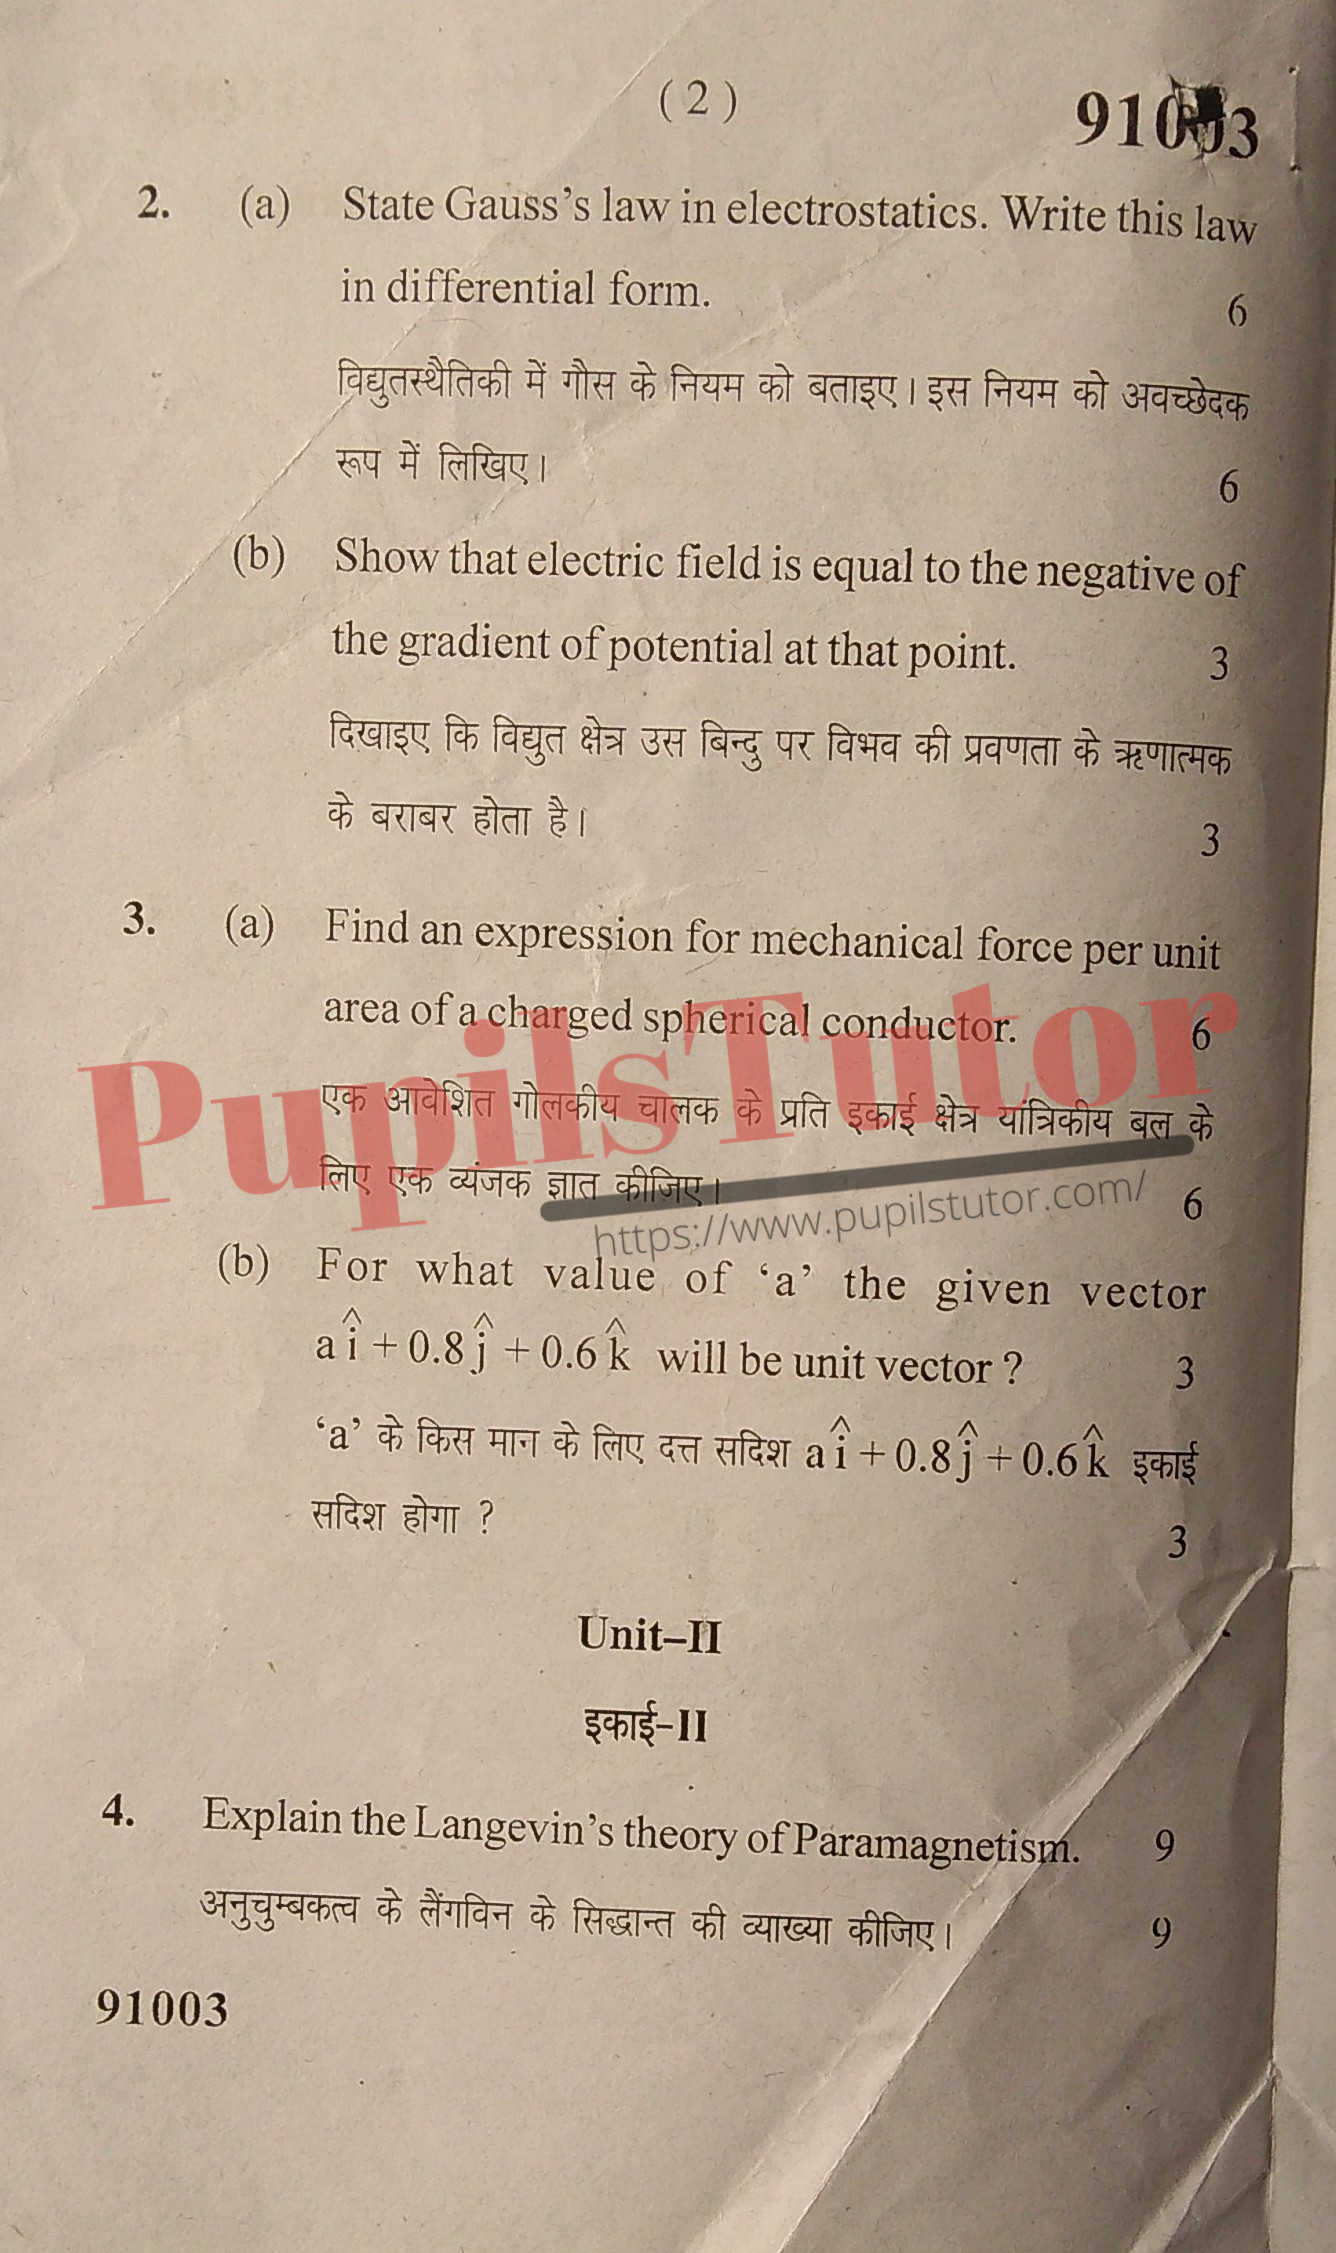 M.D. University B.Sc. [Physics] Electricity And Magnetism First Semester Important Question Answer And Solution - www.pupilstutor.com (Paper Page Number 2)